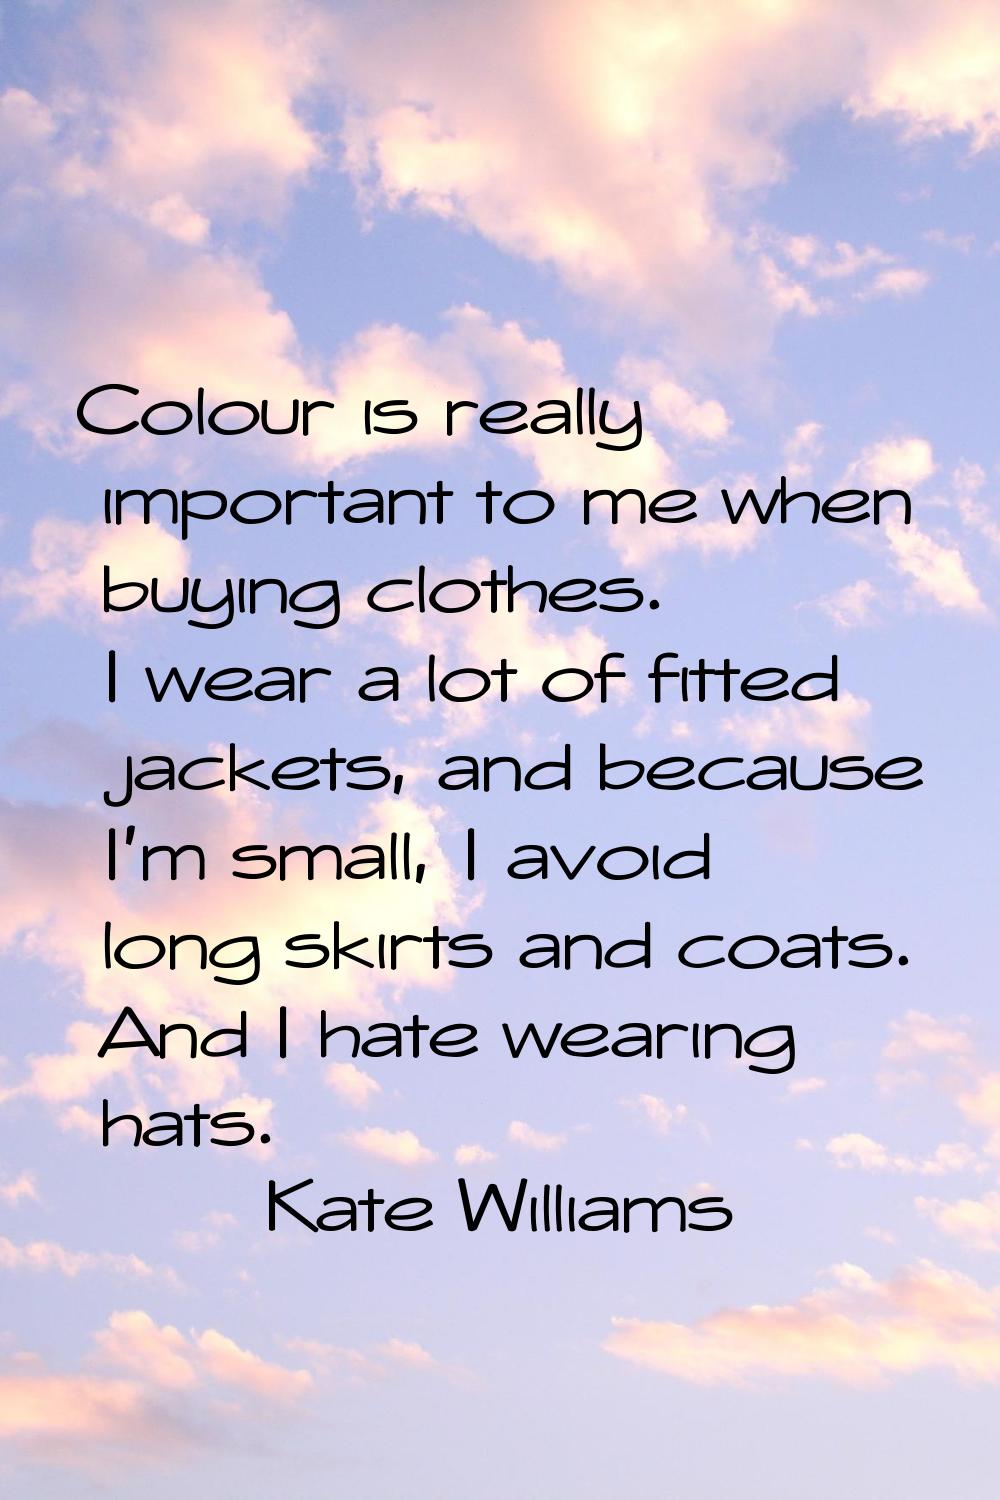 Colour is really important to me when buying clothes. I wear a lot of fitted jackets, and because I